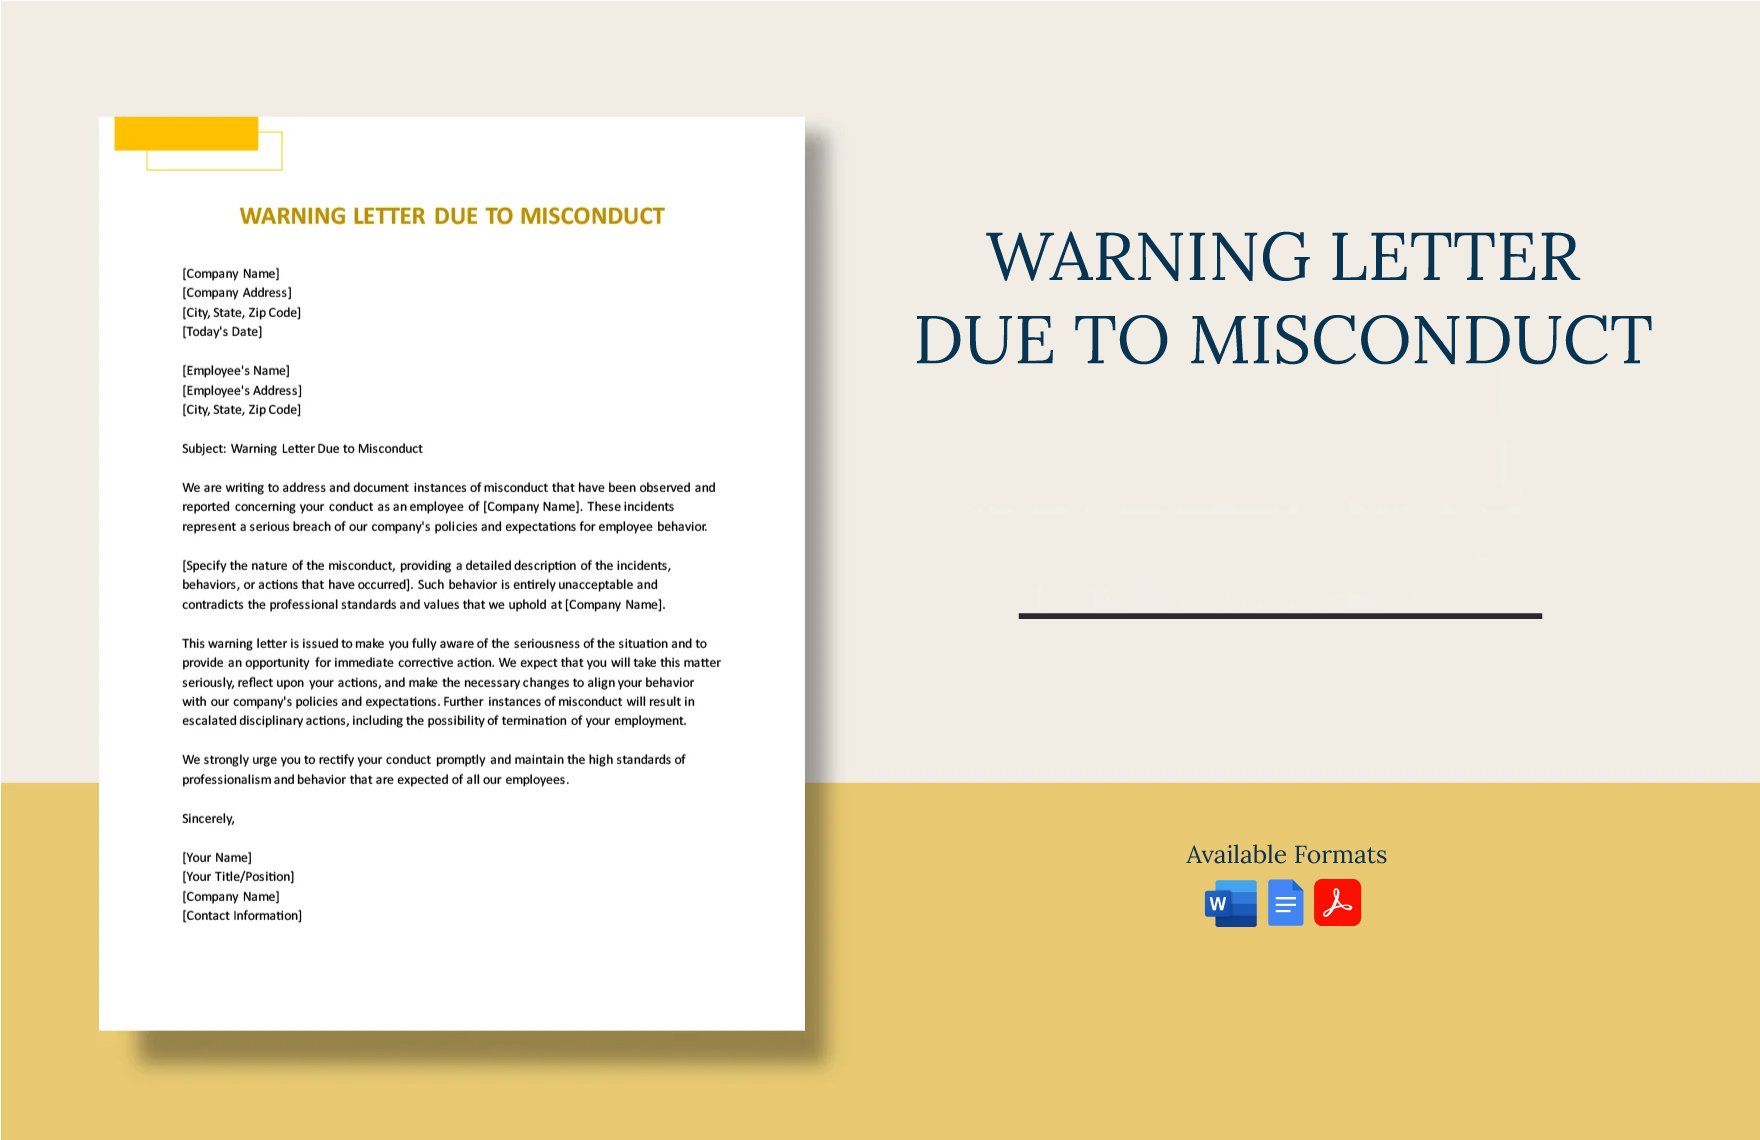 Warning Letter Due To Misconduct in Word, Google Docs, PDF